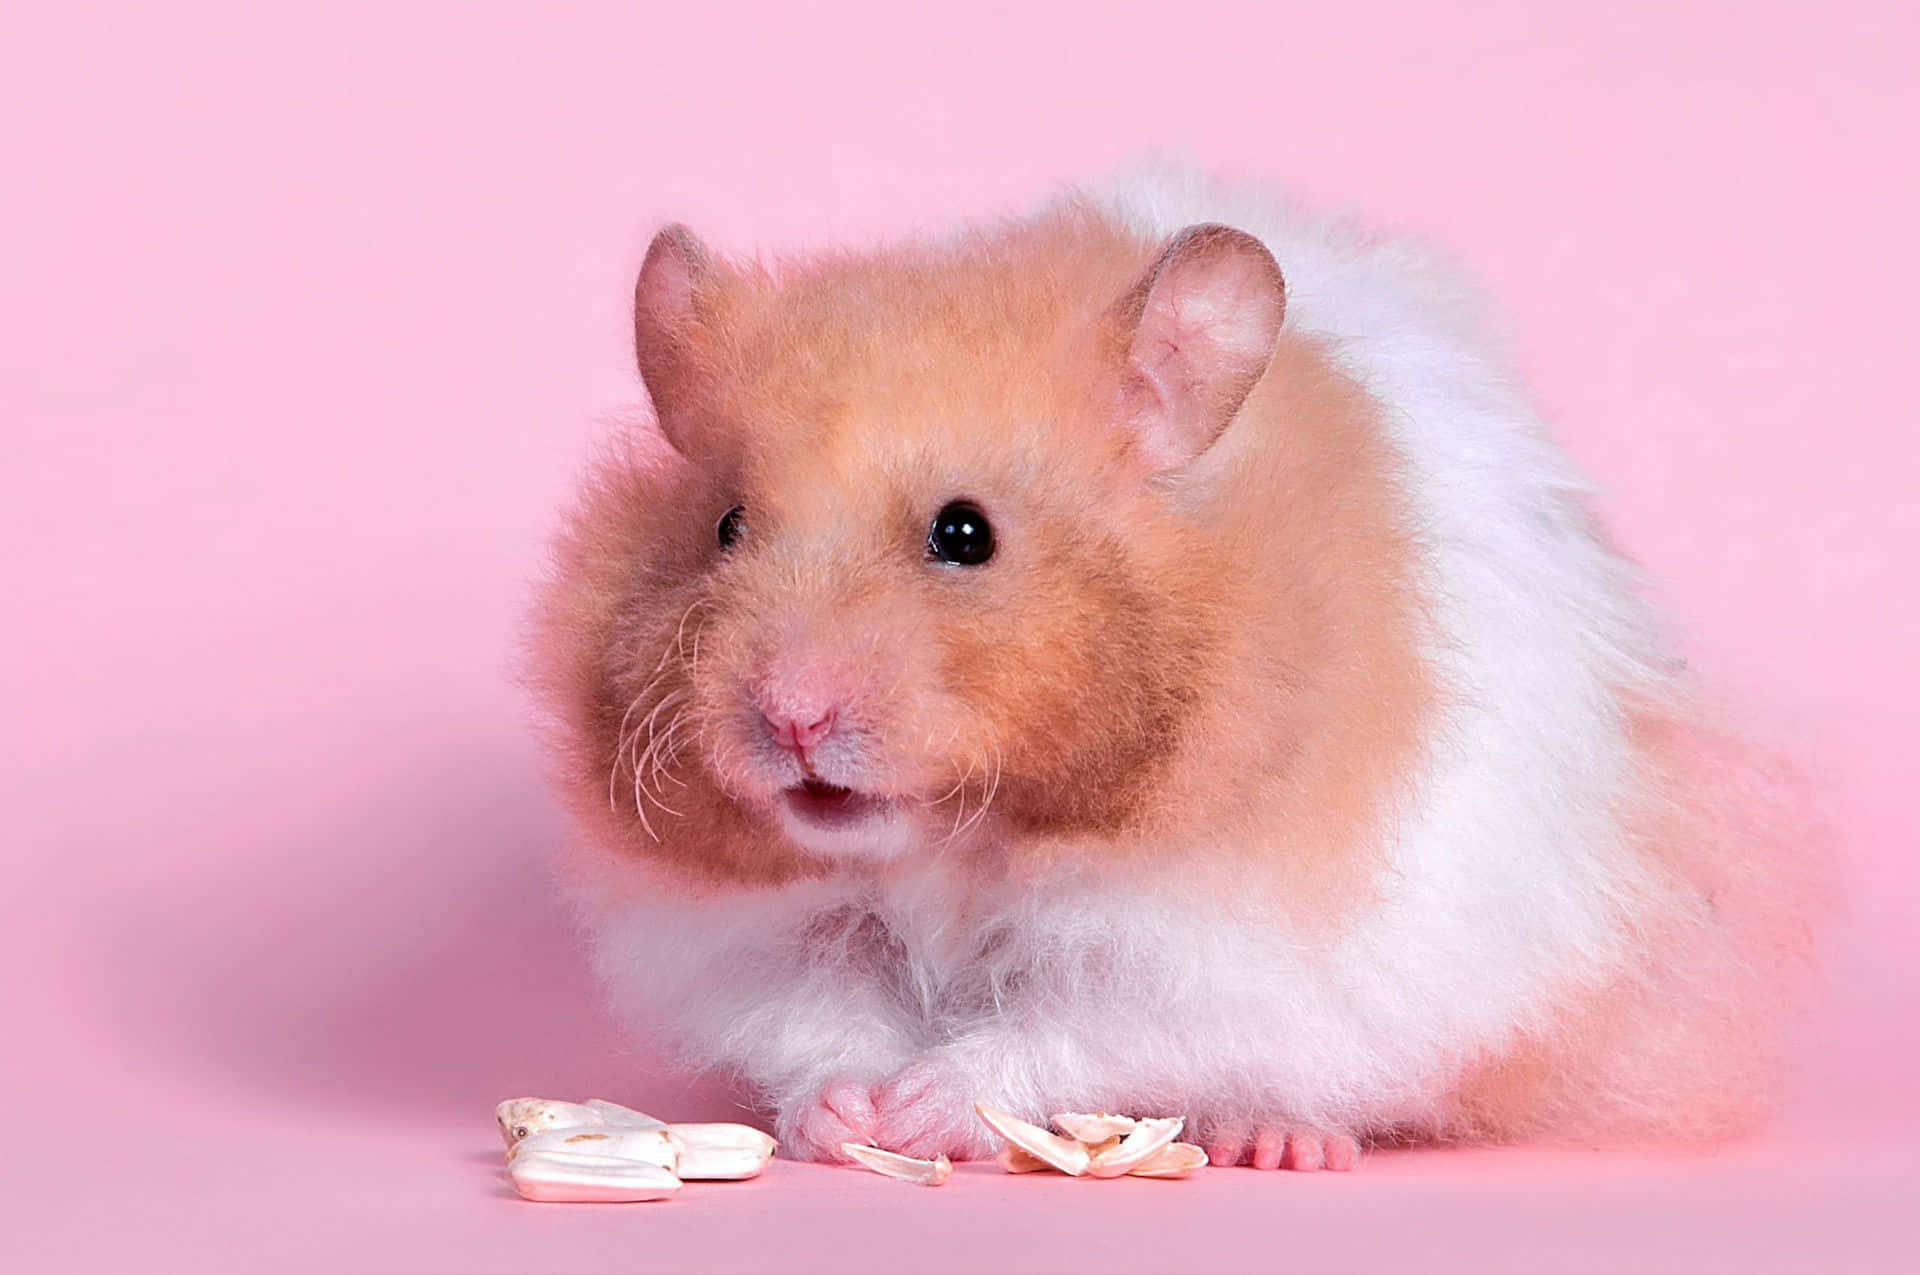 This Playful, Mischievous Hamster Is Having The Time Of Its Life!